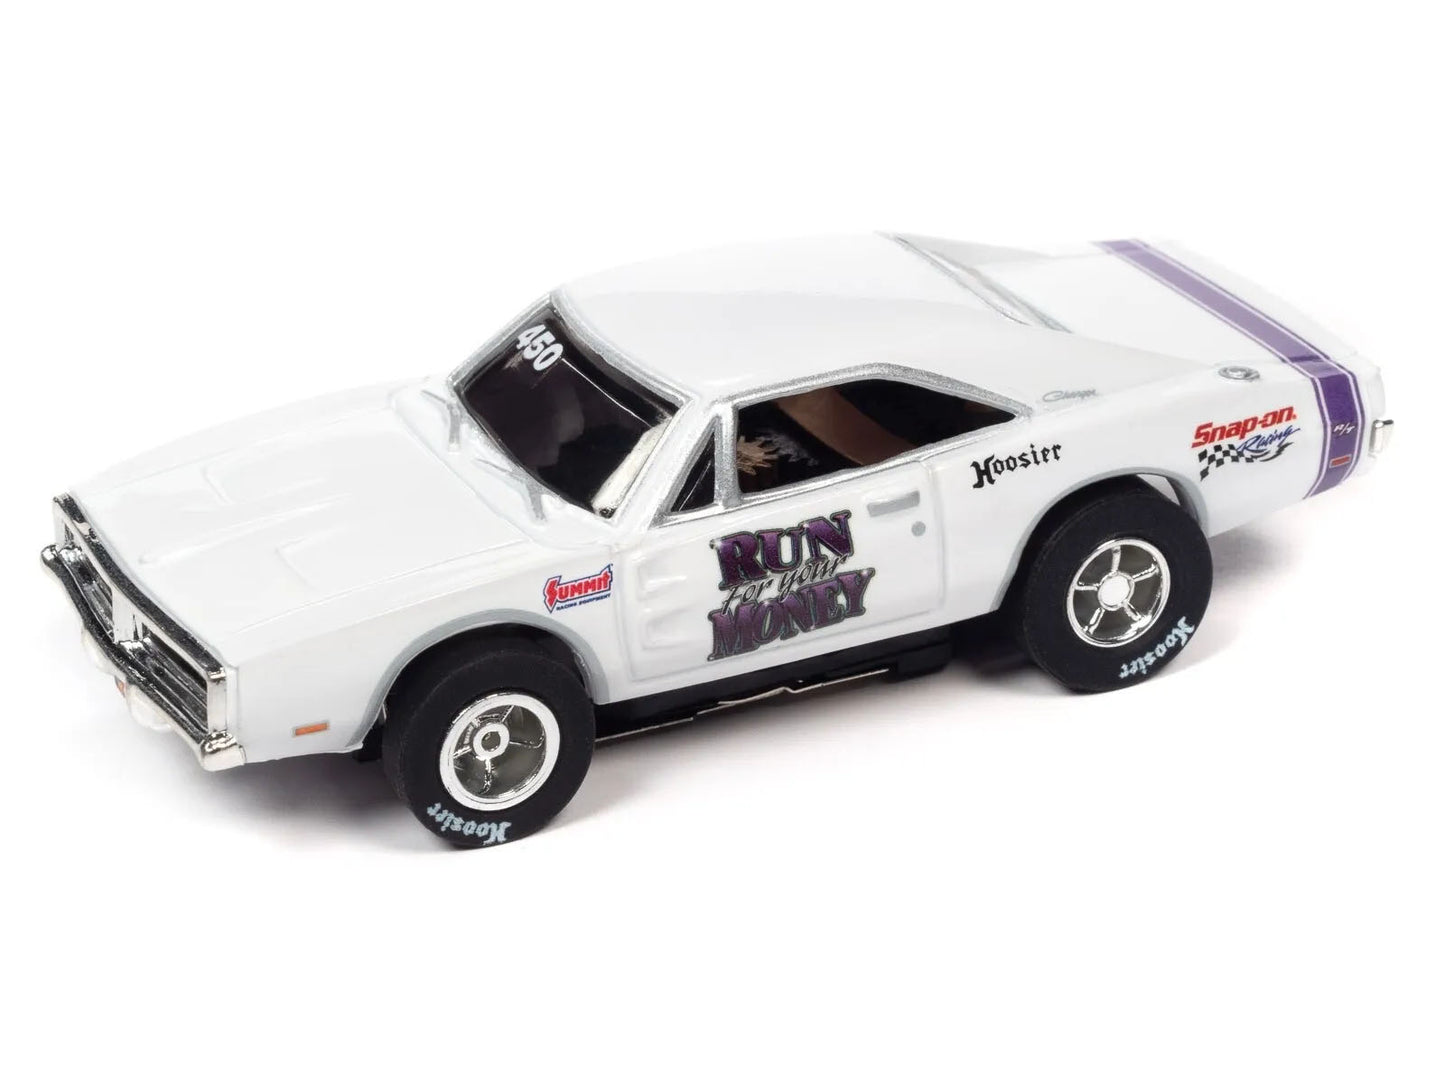 Auto World Exclusive 1969 Dodge Charger R/T HO Scale Slot Car For AFX - PowerHobby